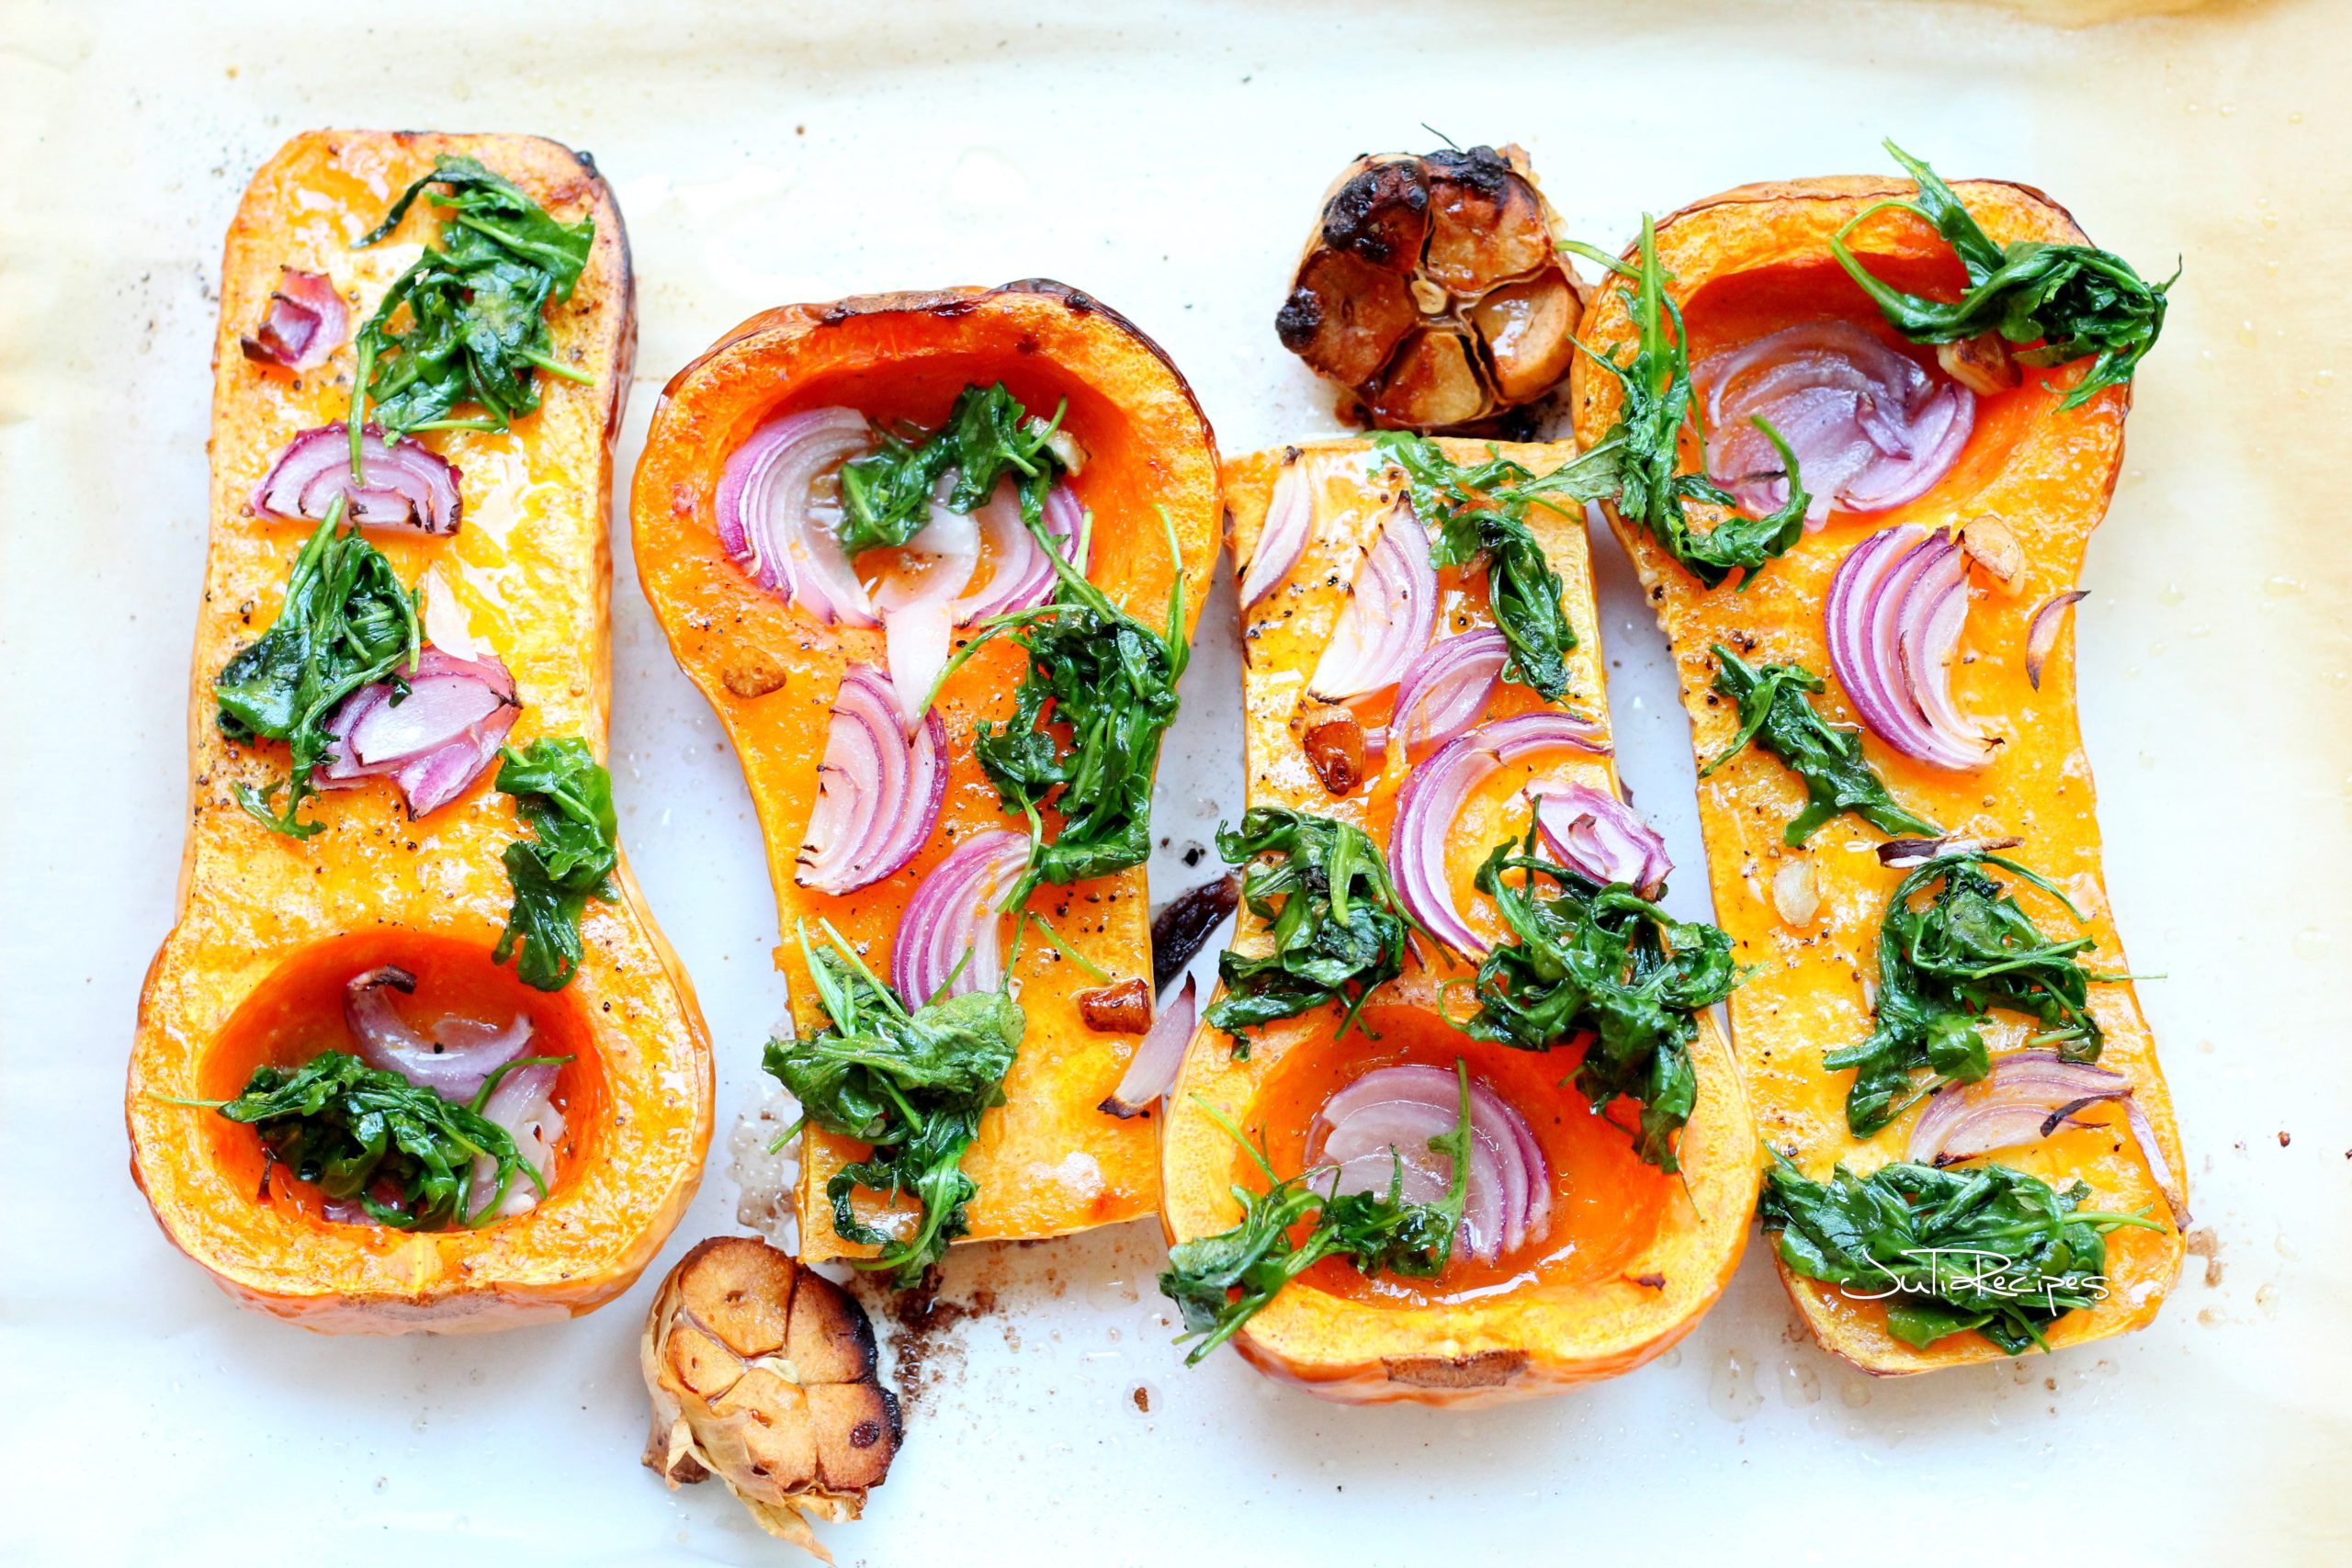 butternut squash dressed with arugula and red onion, with garlic